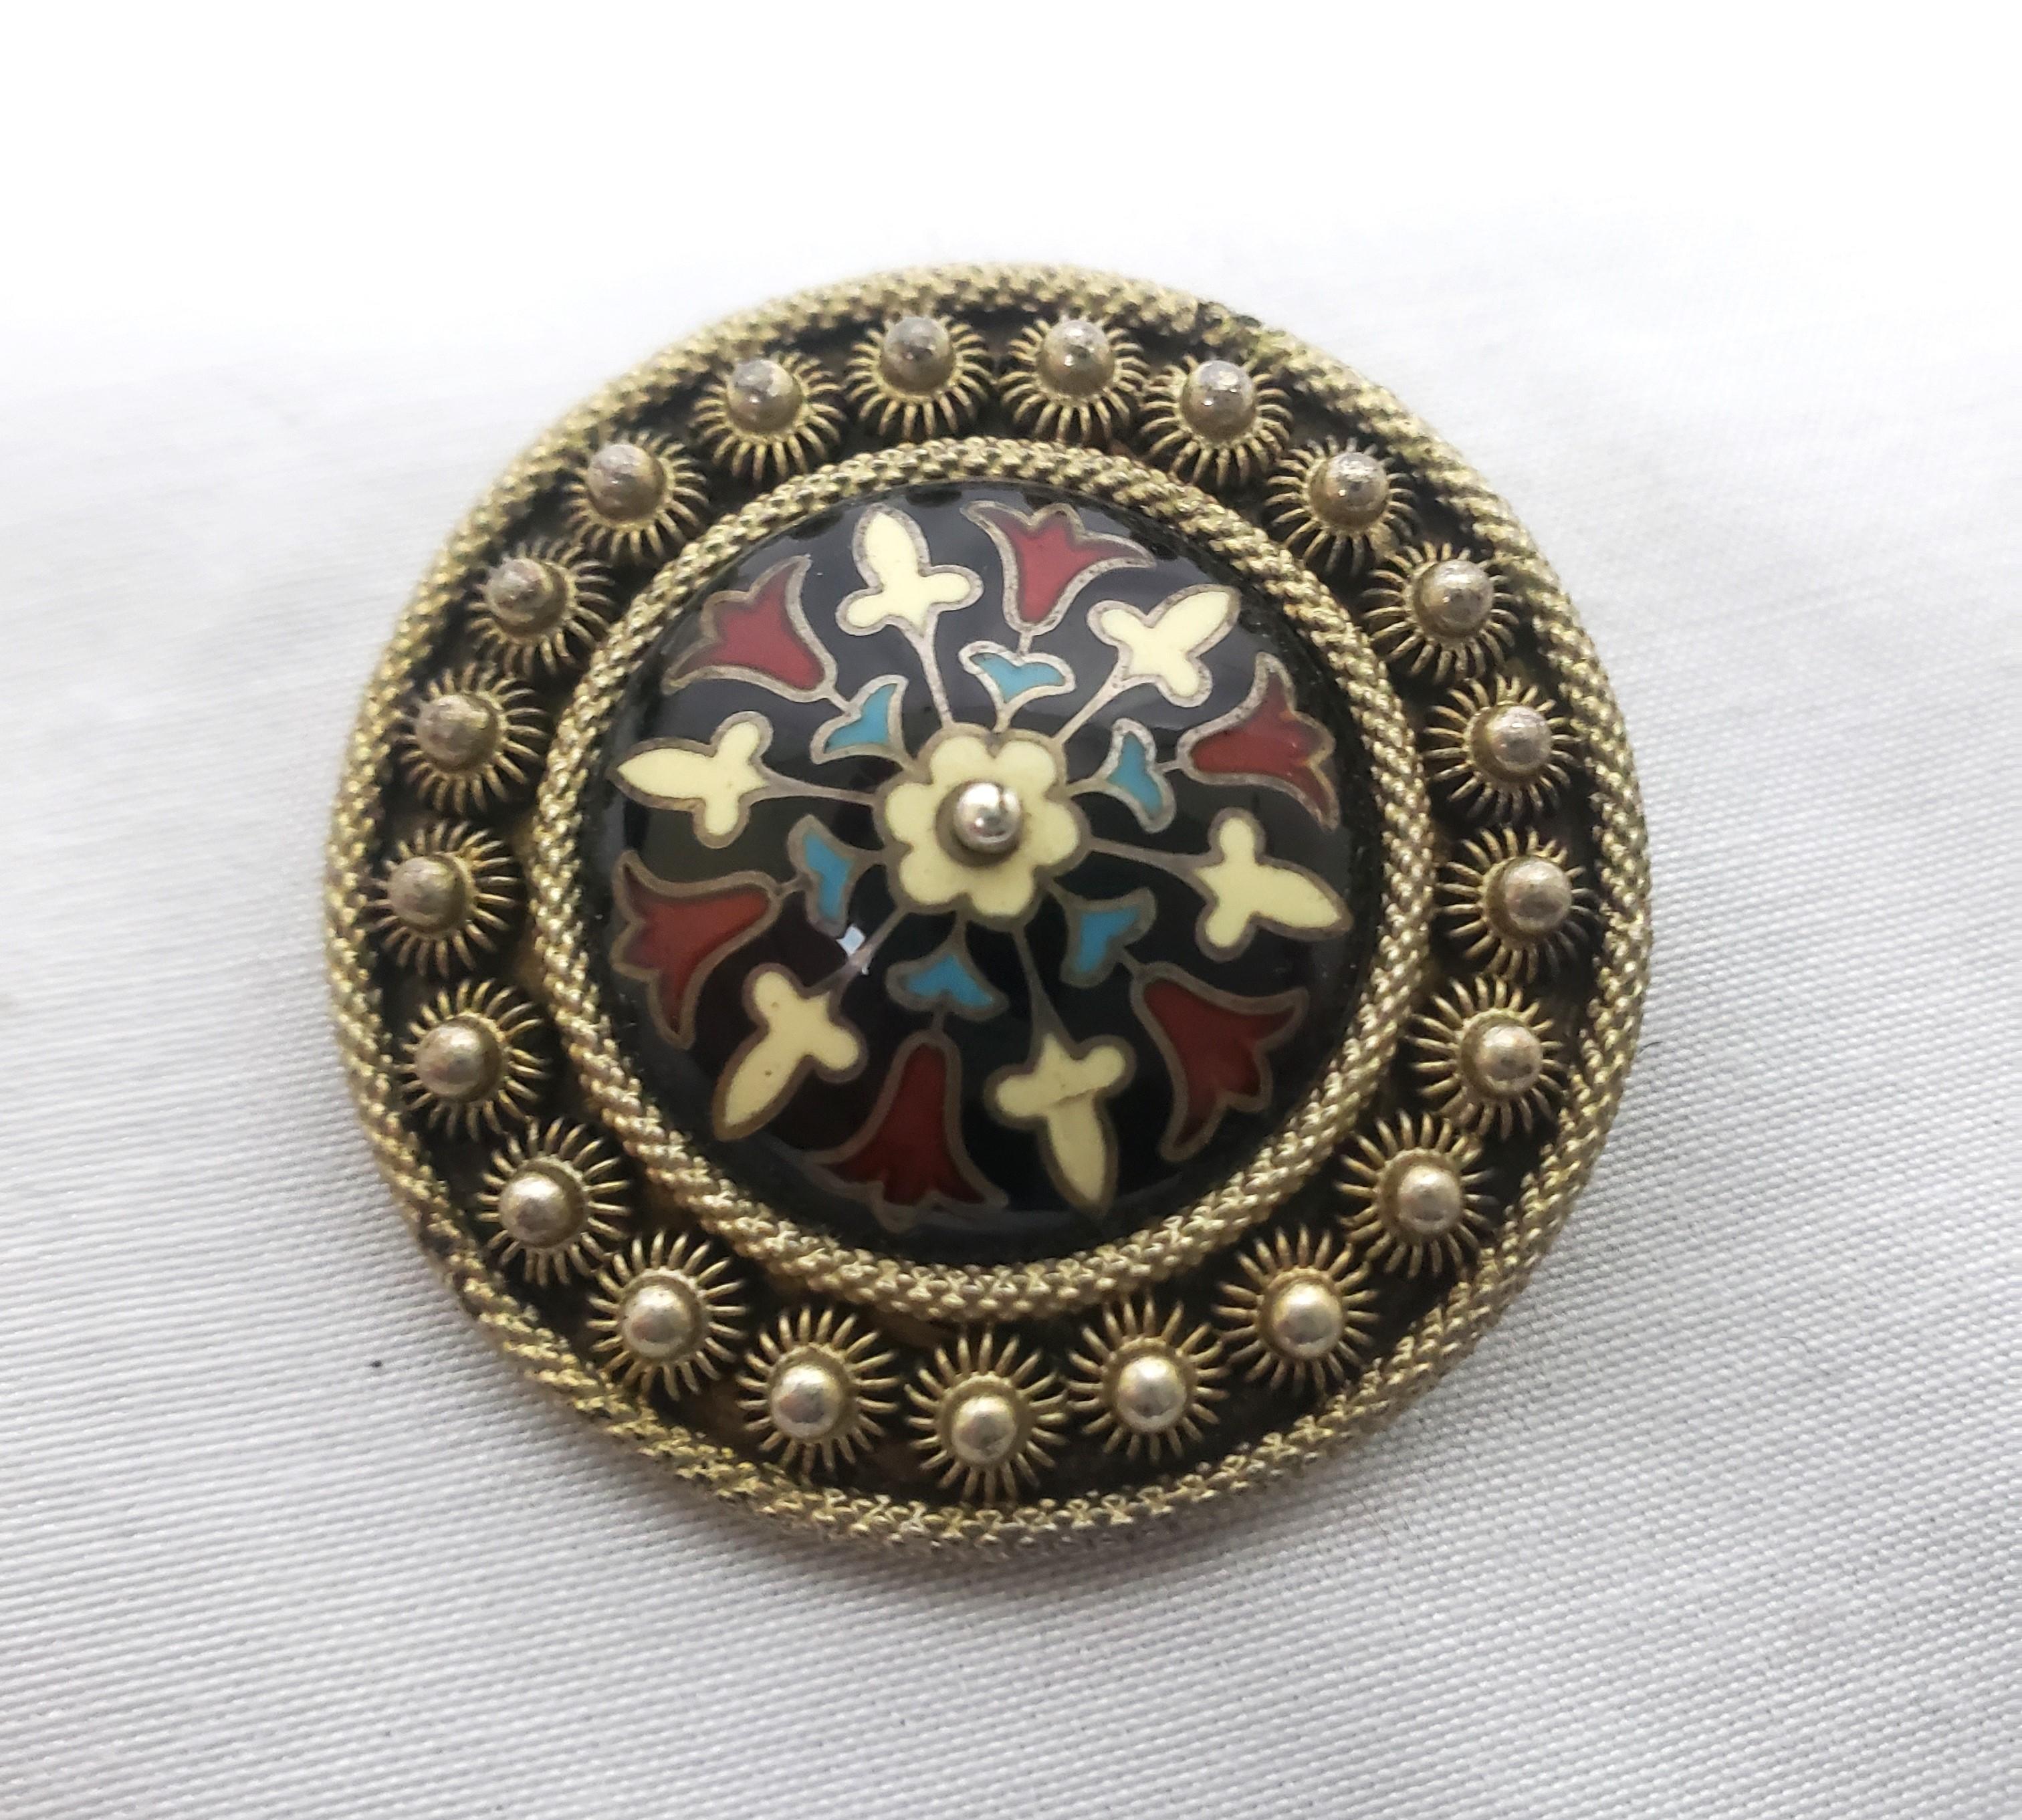 This antique brooch is hallmarked by an unknown maker and presumed to have originated from Austria and date to approximately 1900 and done in a period Art Nouveau style. The brooch is composed of silver with ornate enamel decoration with a stylized